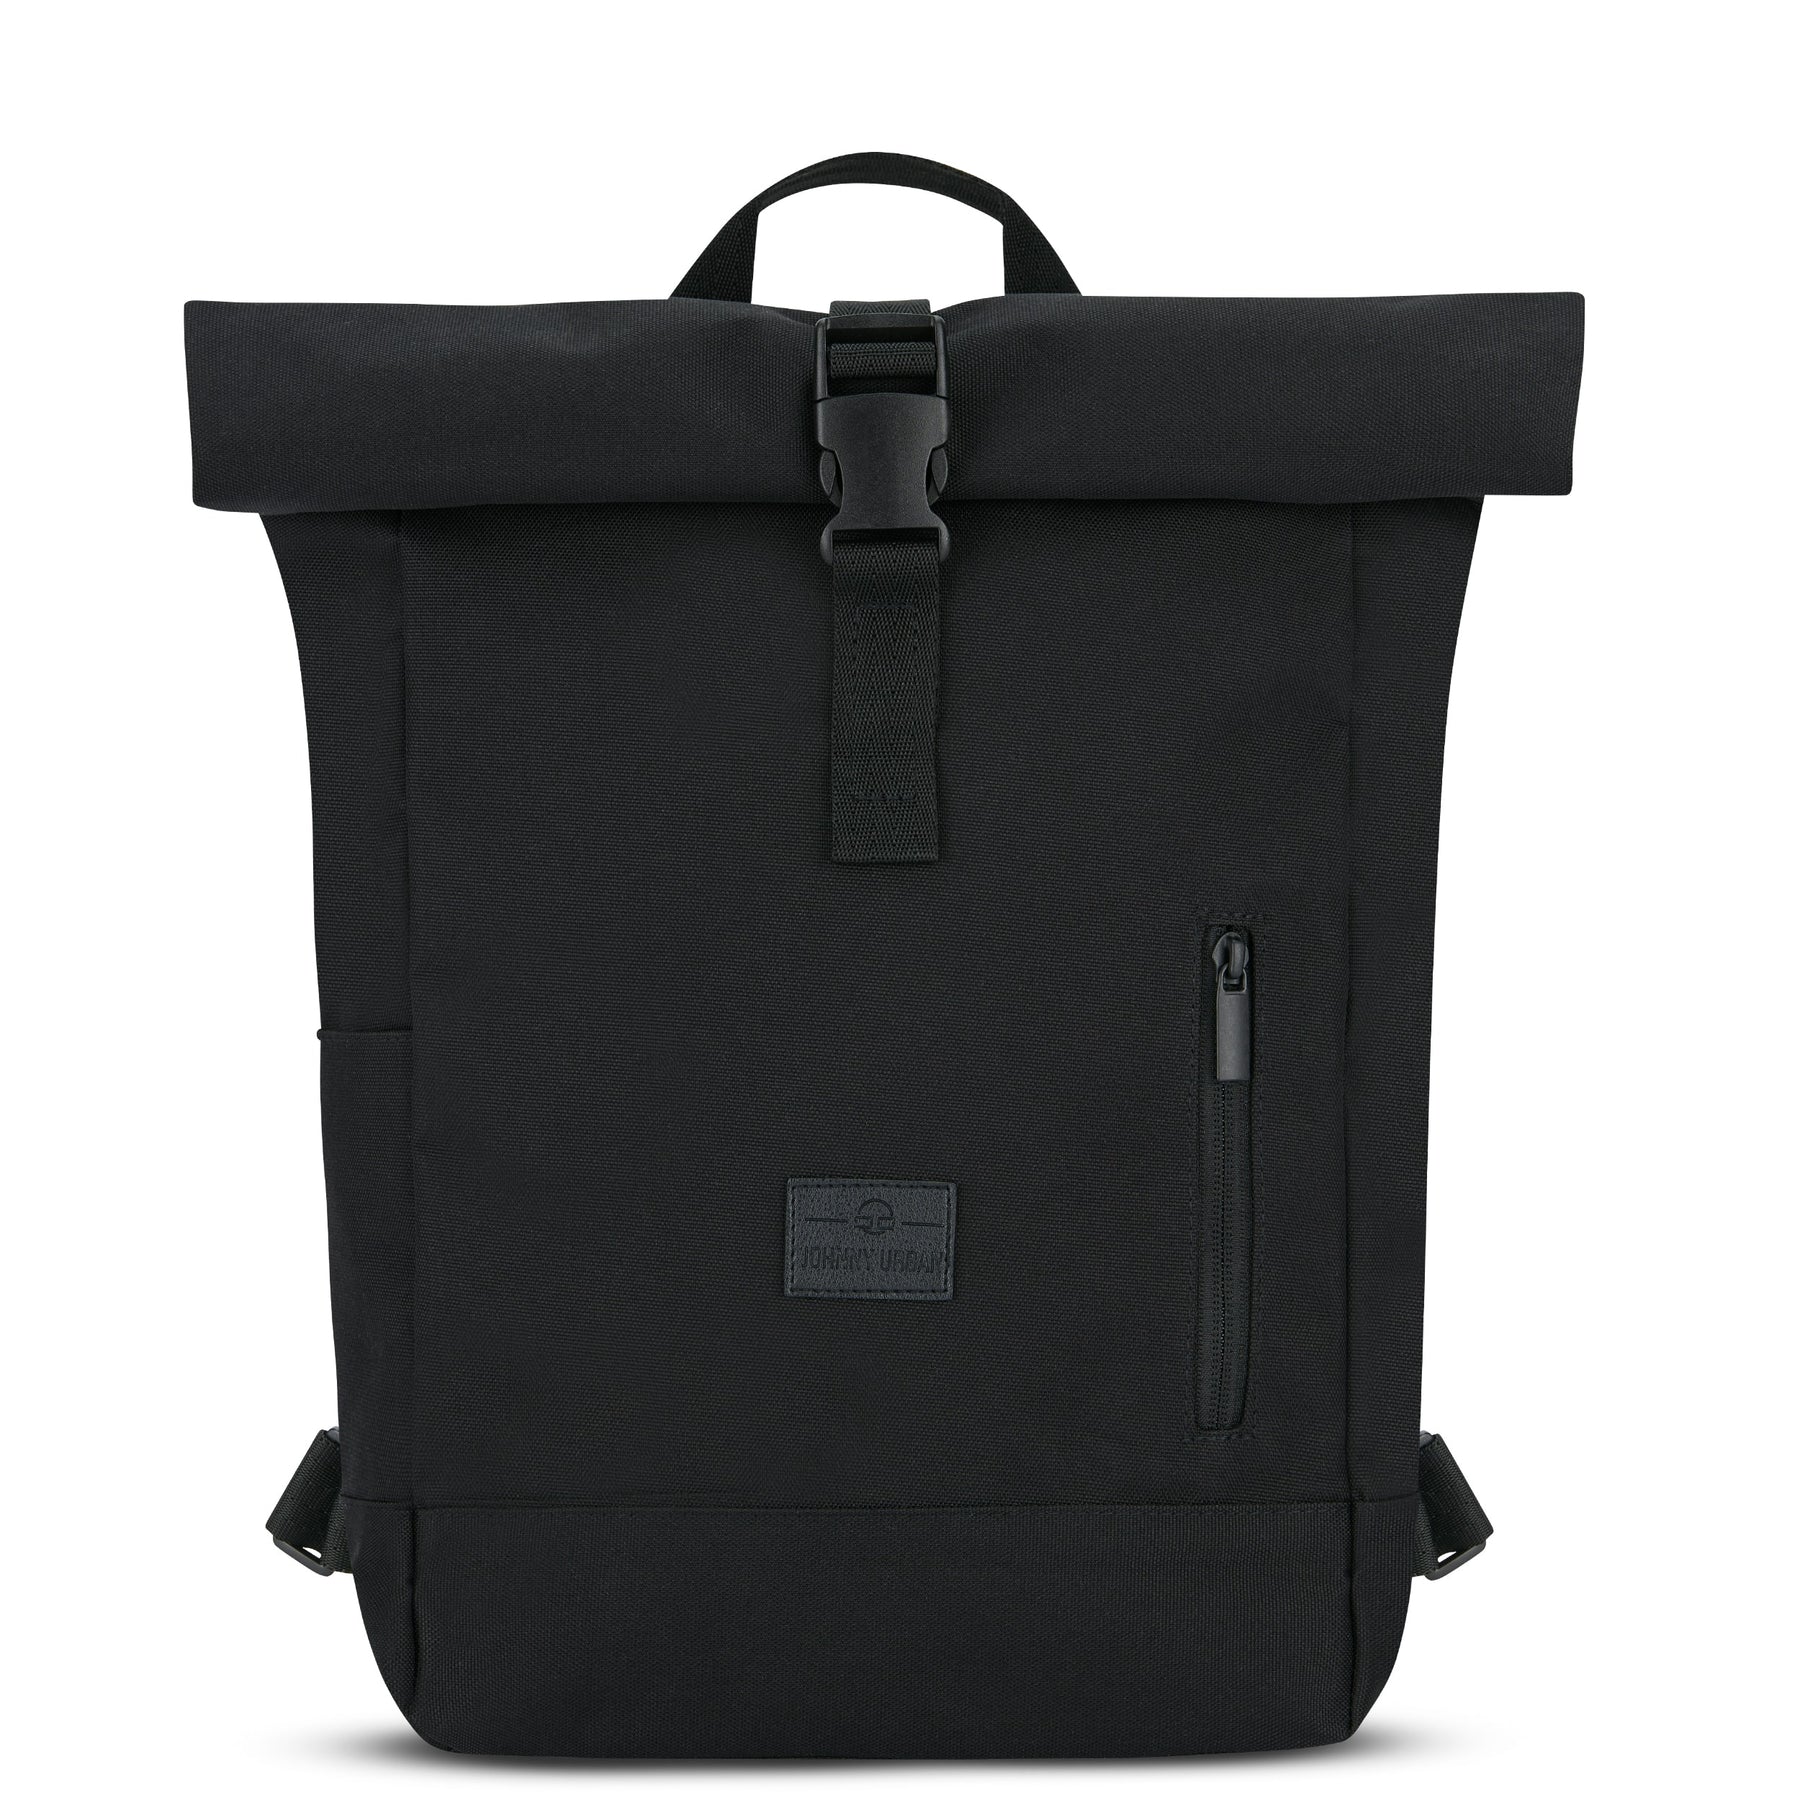 Roll top Backpack "Robin Small"